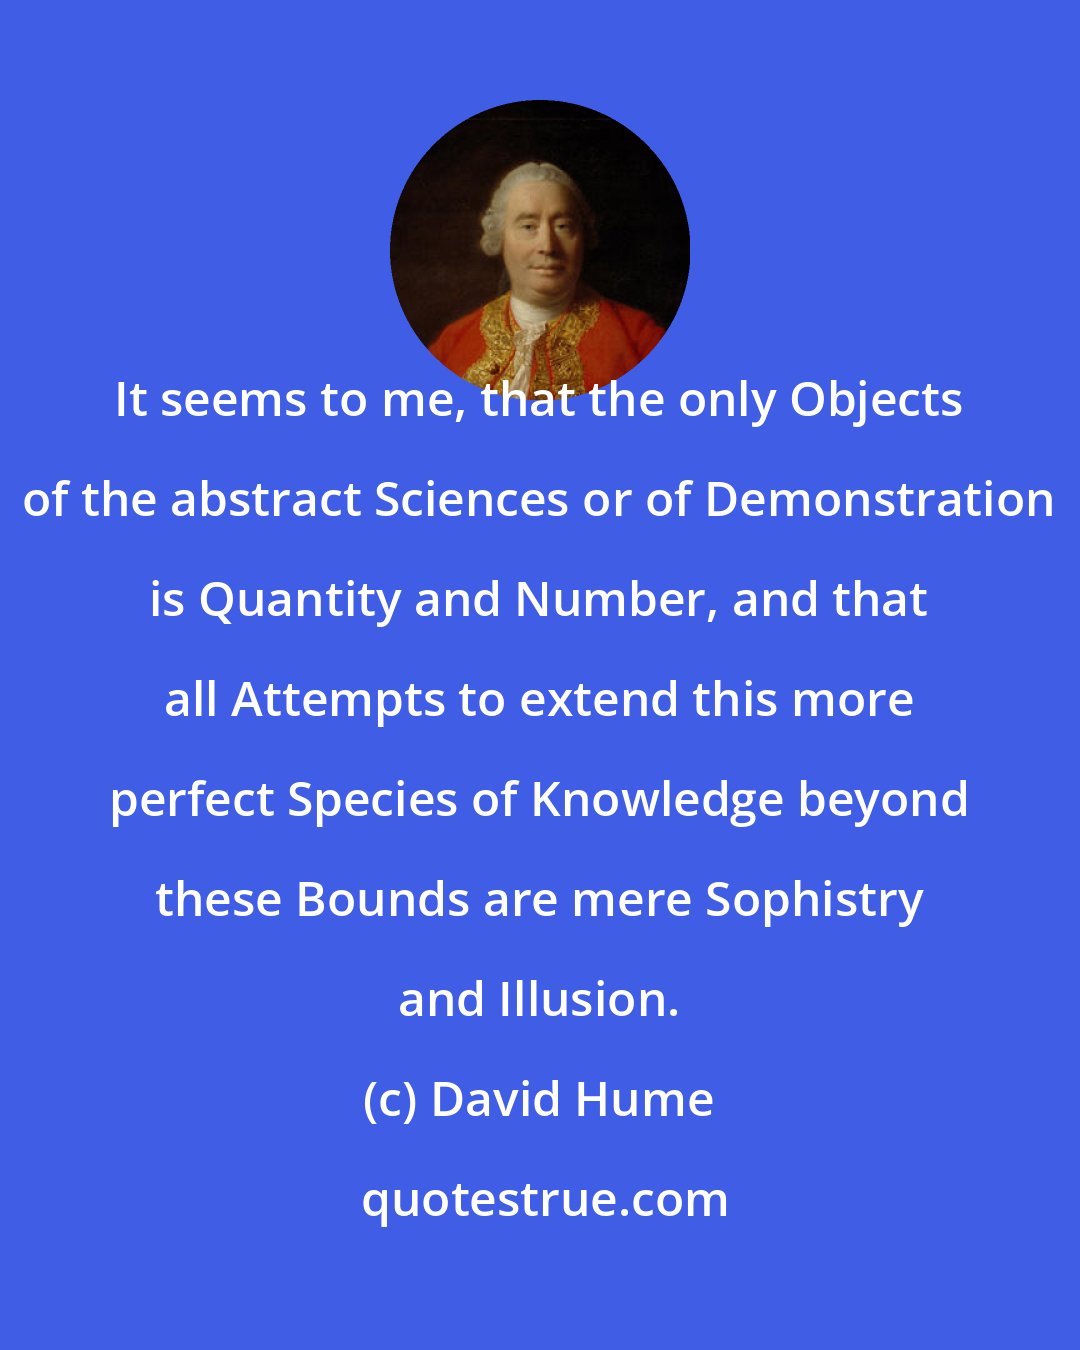 David Hume: It seems to me, that the only Objects of the abstract Sciences or of Demonstration is Quantity and Number, and that all Attempts to extend this more perfect Species of Knowledge beyond these Bounds are mere Sophistry and Illusion.